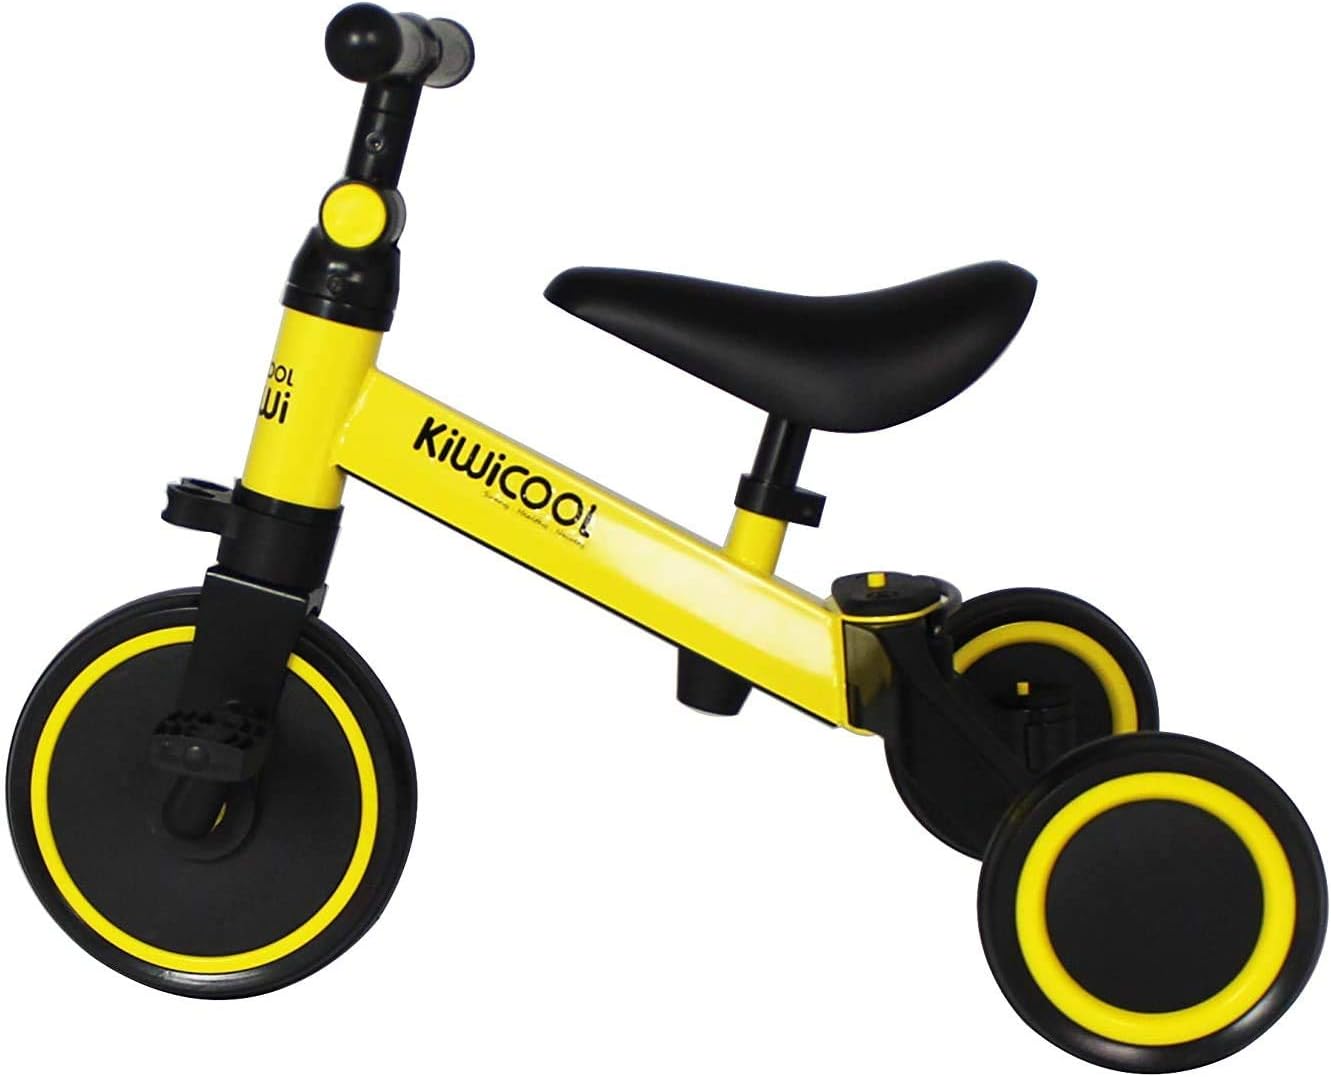 SKY-TOUCH 3 In 1 Kids Tricycles For 1.5-4 Years Old Kids Trike 3 Wheel Bike Boys Girls 3 Wheels Toddler Tricycles(Yellow)